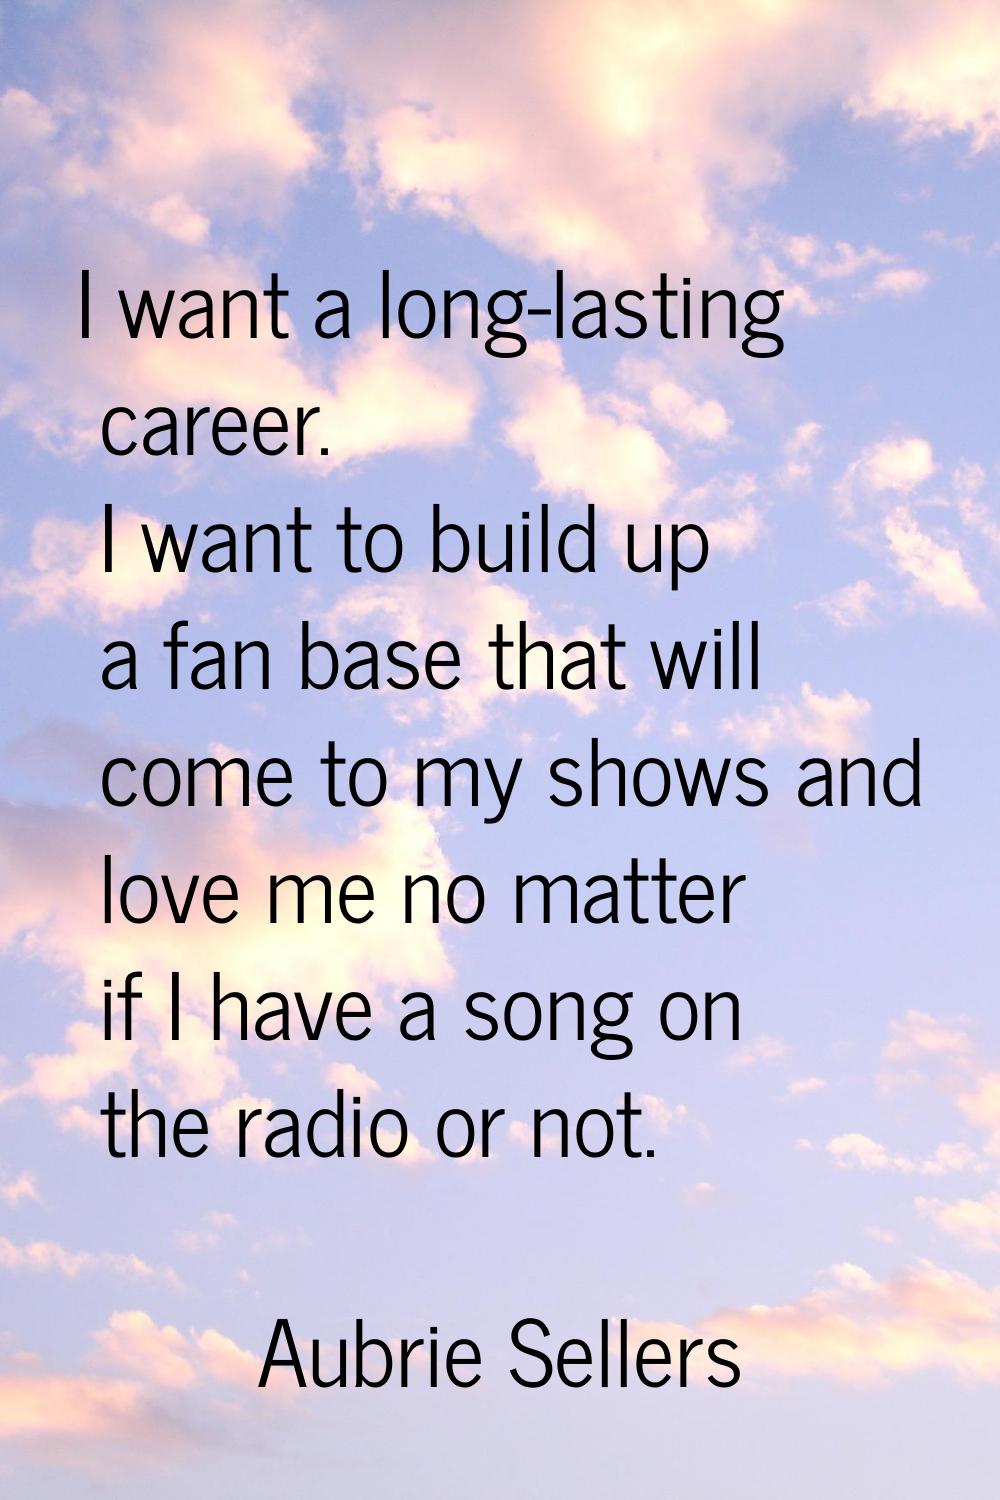 I want a long-lasting career. I want to build up a fan base that will come to my shows and love me 